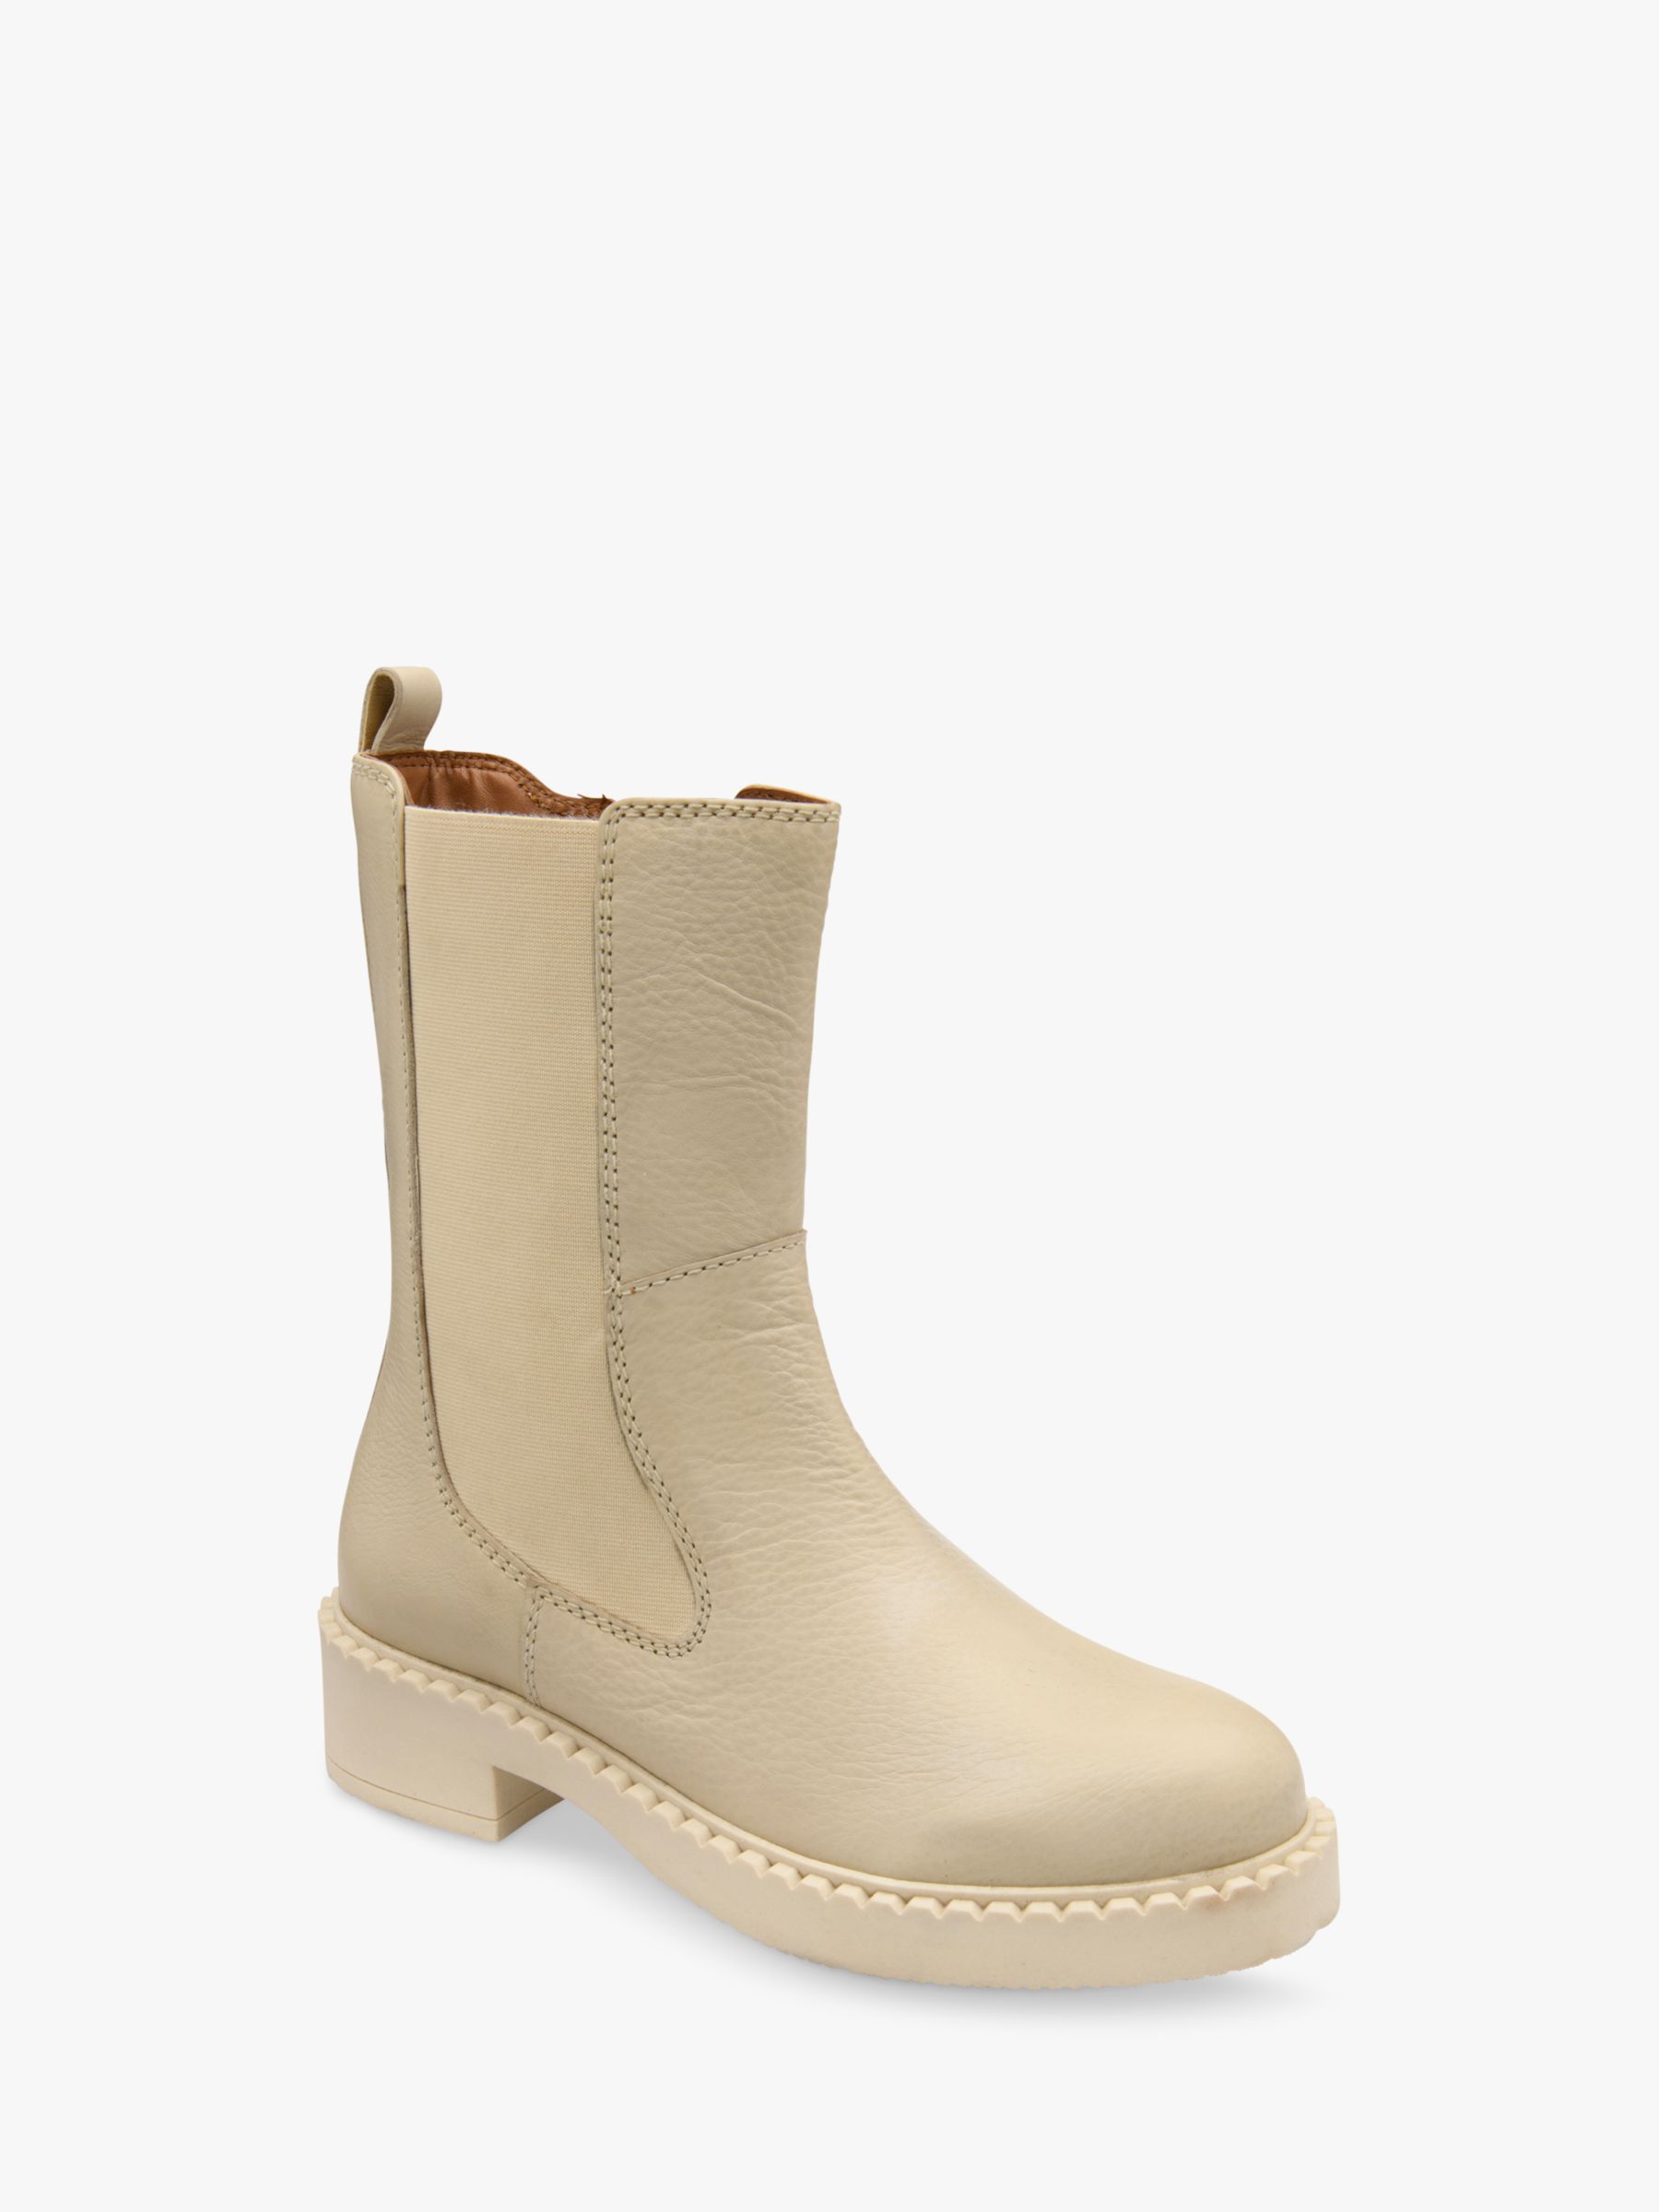 Ravel Garvie Leather Mid-Calf Boots, Stone at John Lewis & Partners